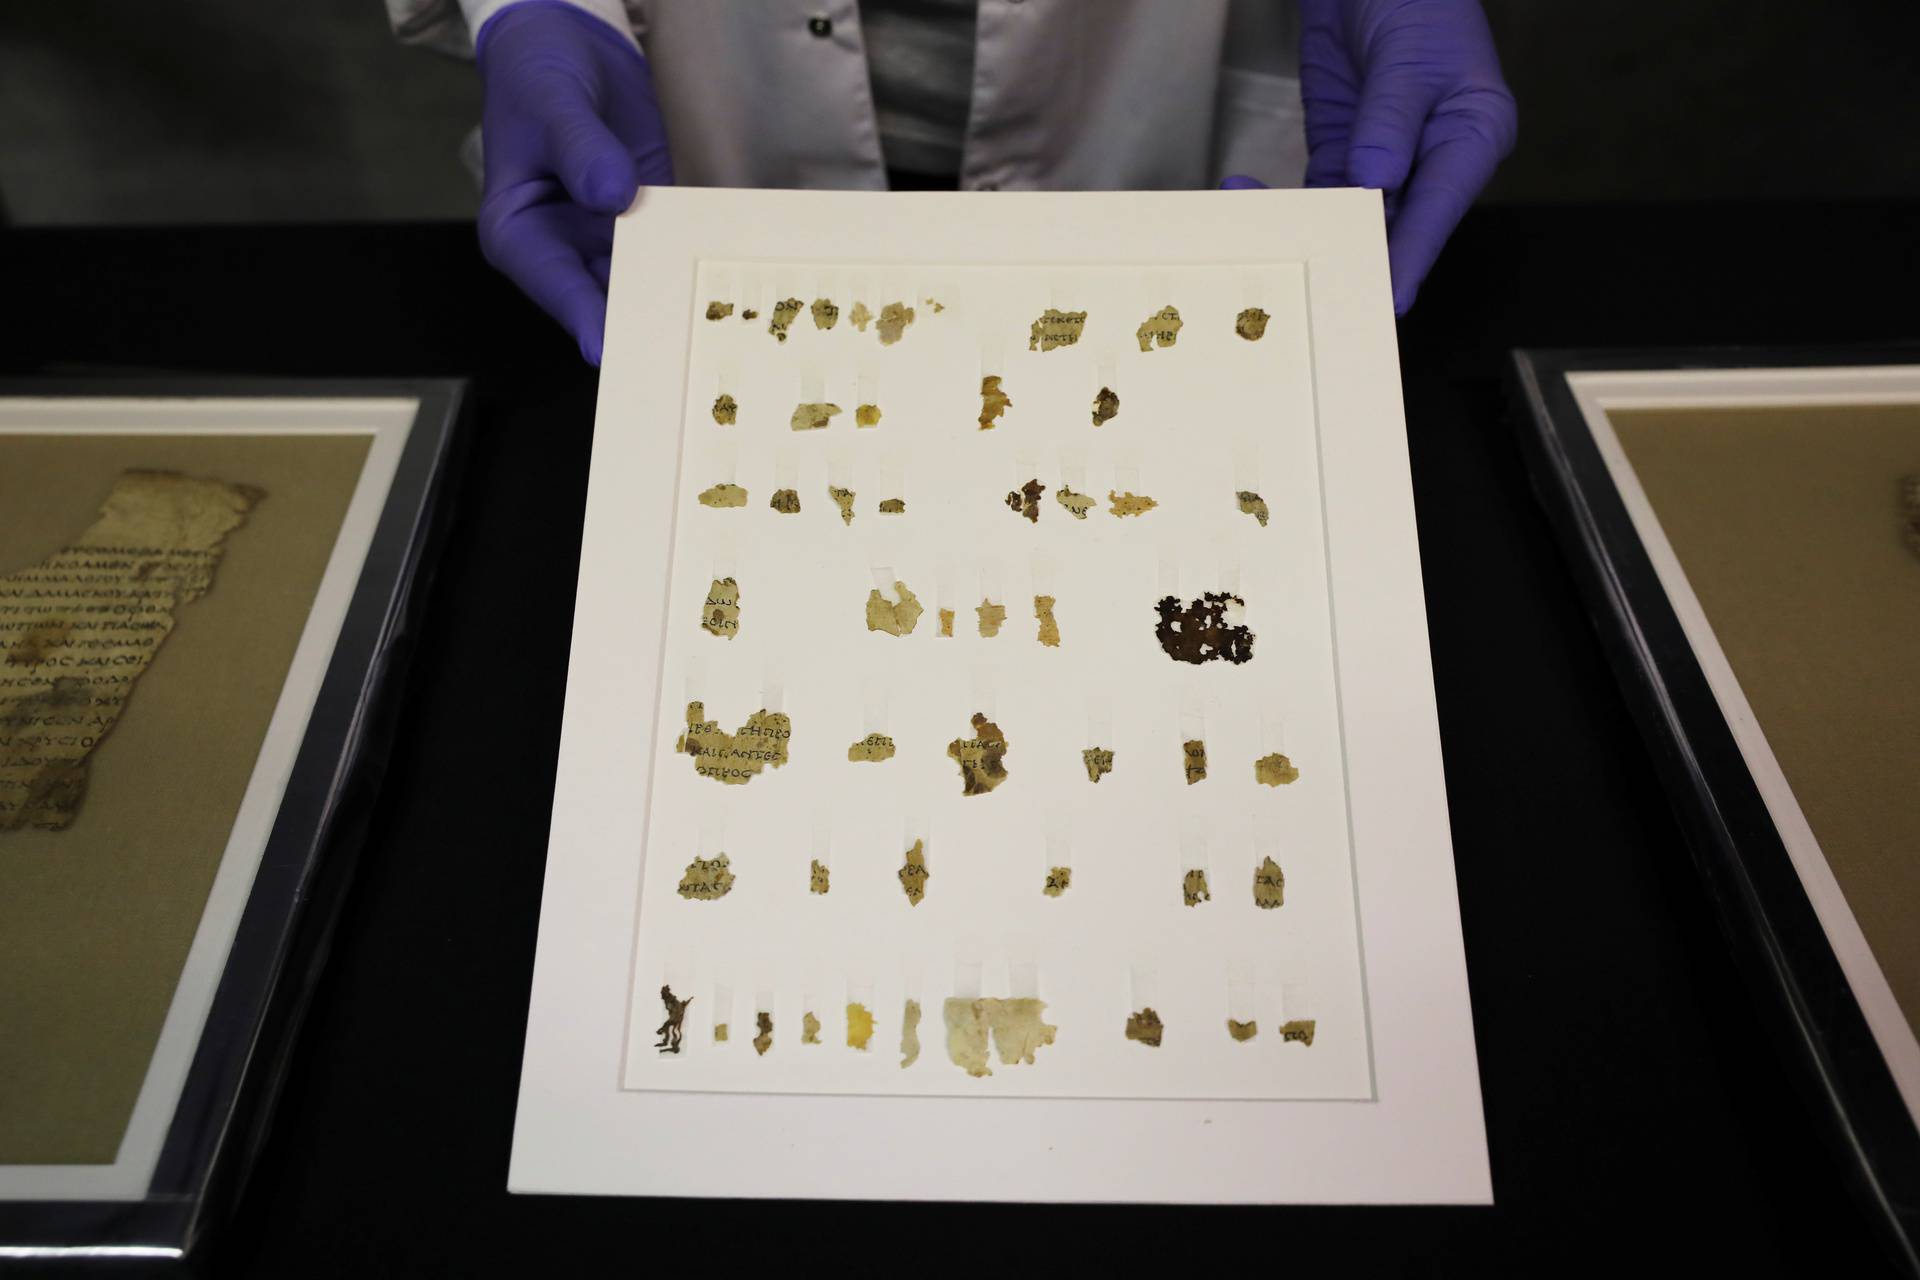 An employee shows recently-discovered scroll fragments of an ancient biblical text at Israel Antiquities Authority laboratories in Jerusalem